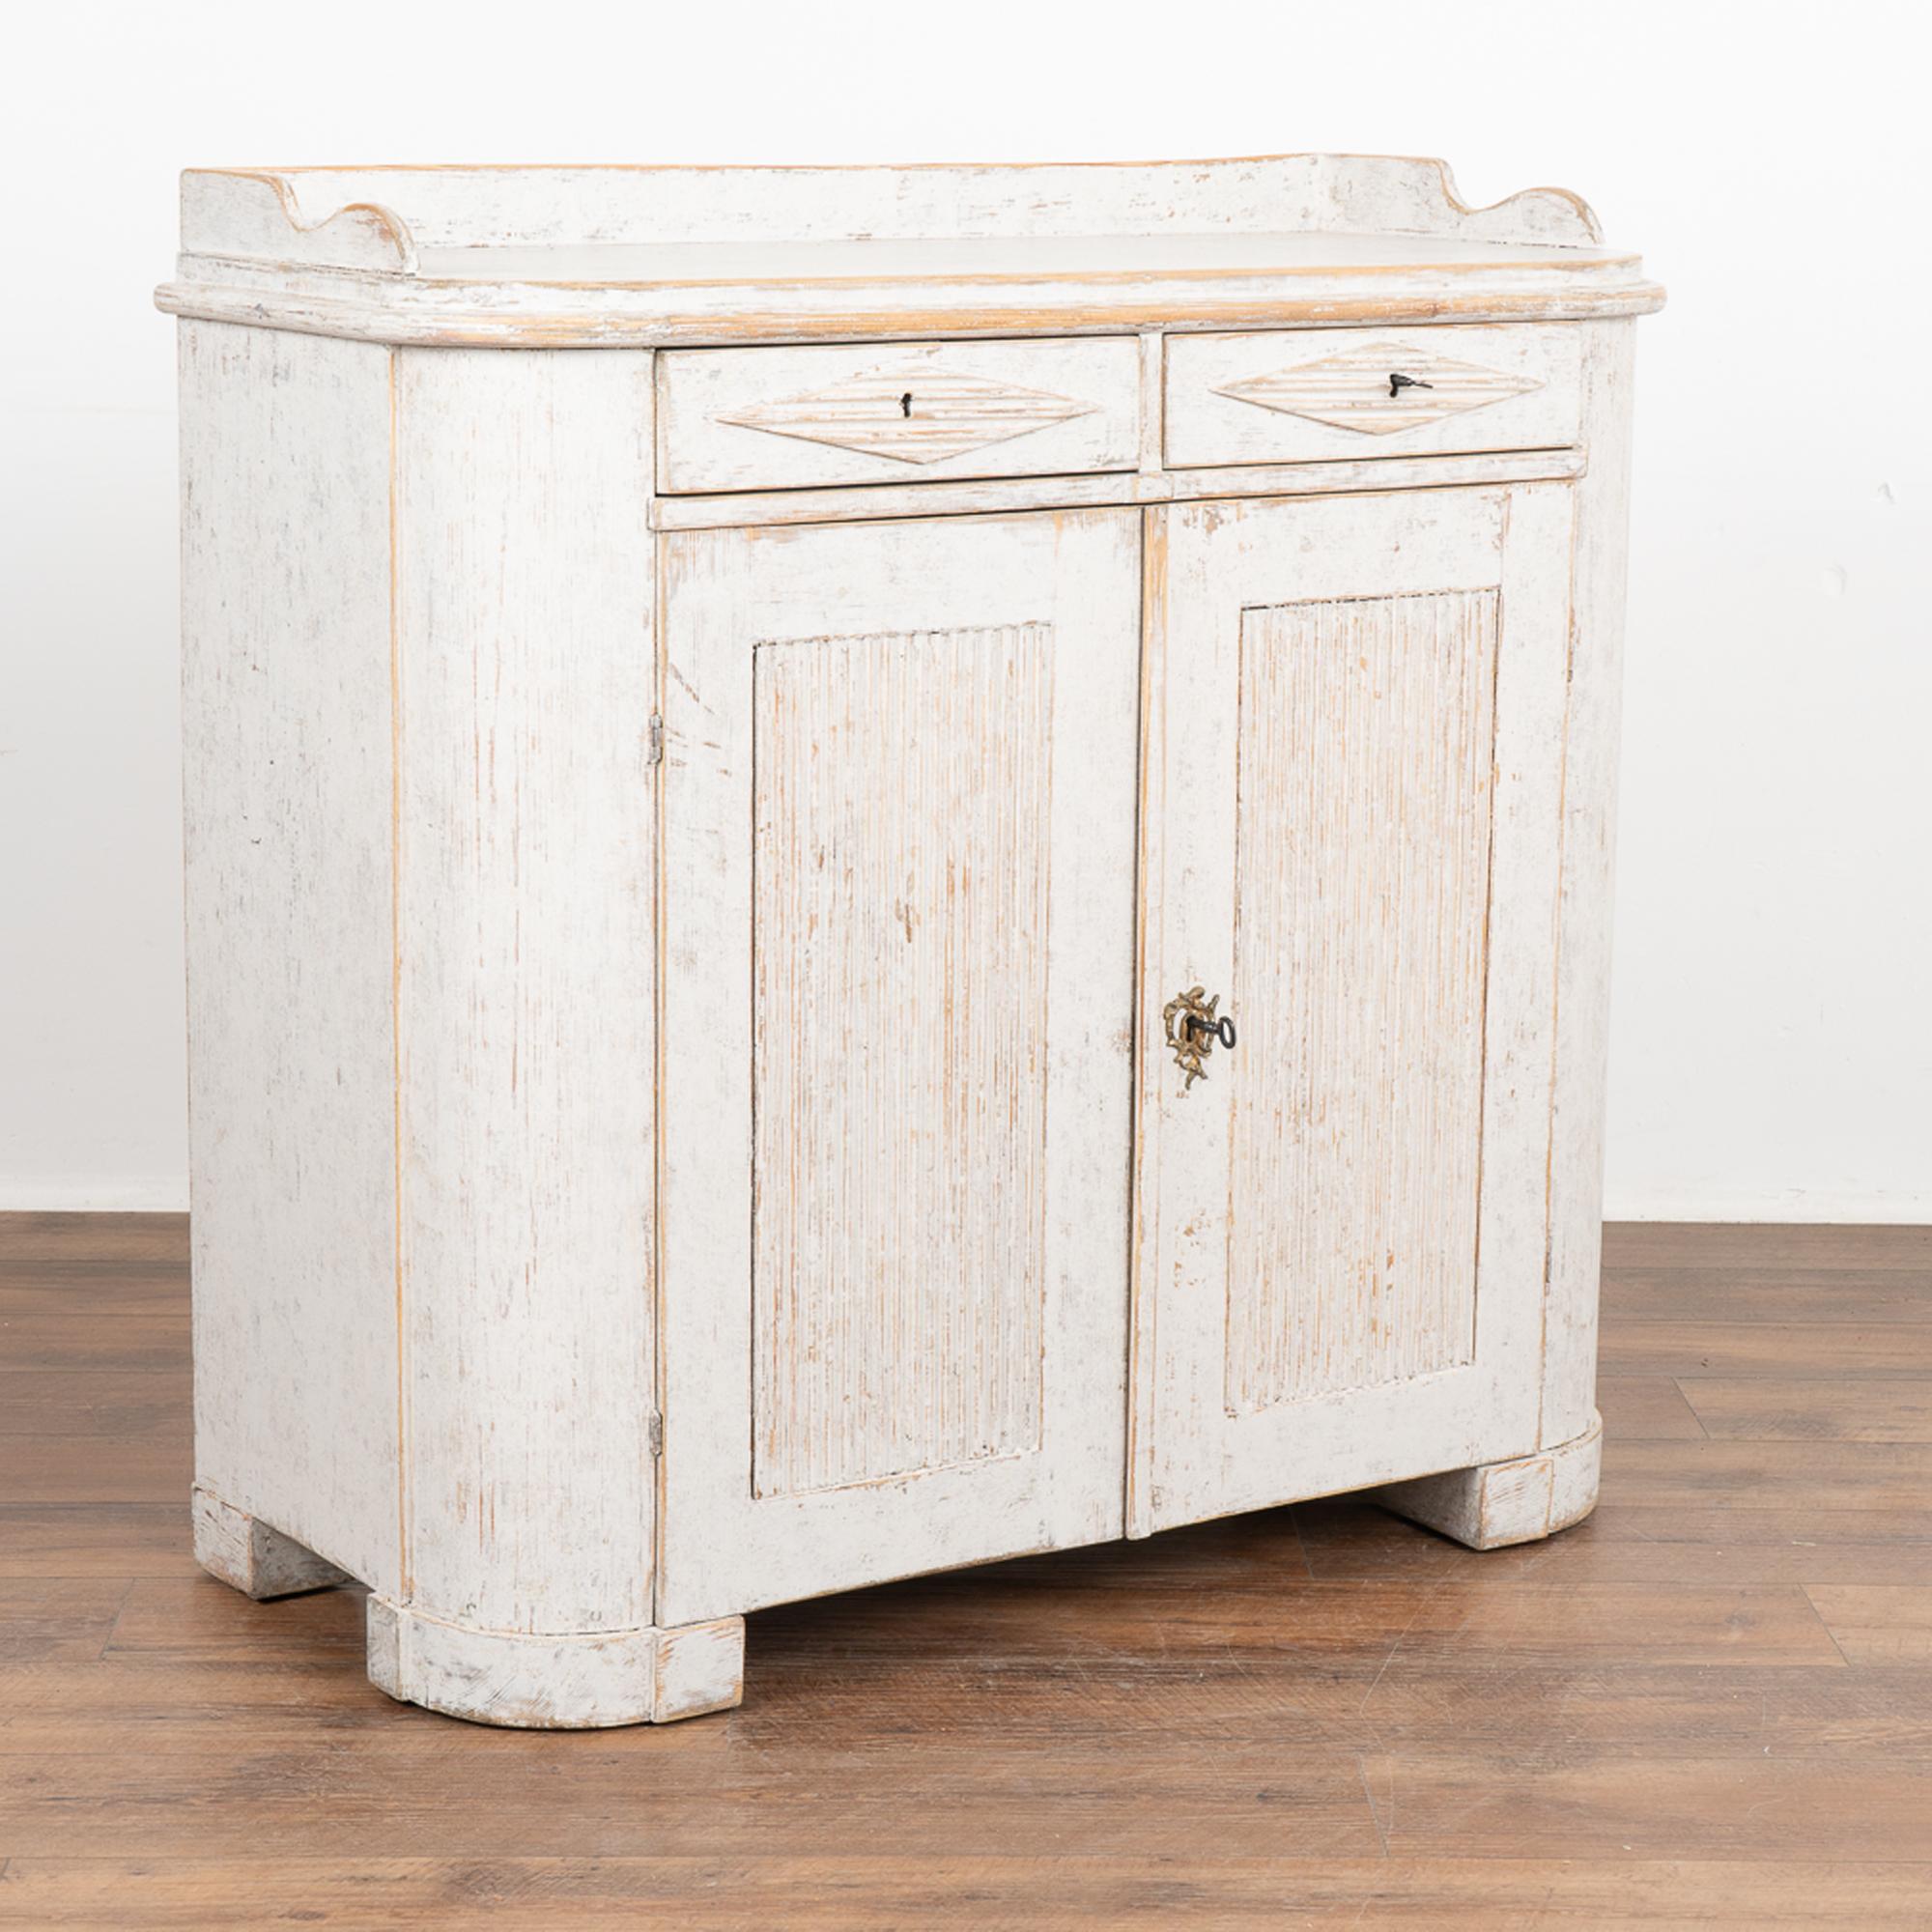 Gustavian small pine sideboard with traditional decorative fluted panels on cabinet doors, two small upper drawers with fluted diamond detail.
The newer, professionally applied white exterior is slightly distressed, fitting the age and grace of this